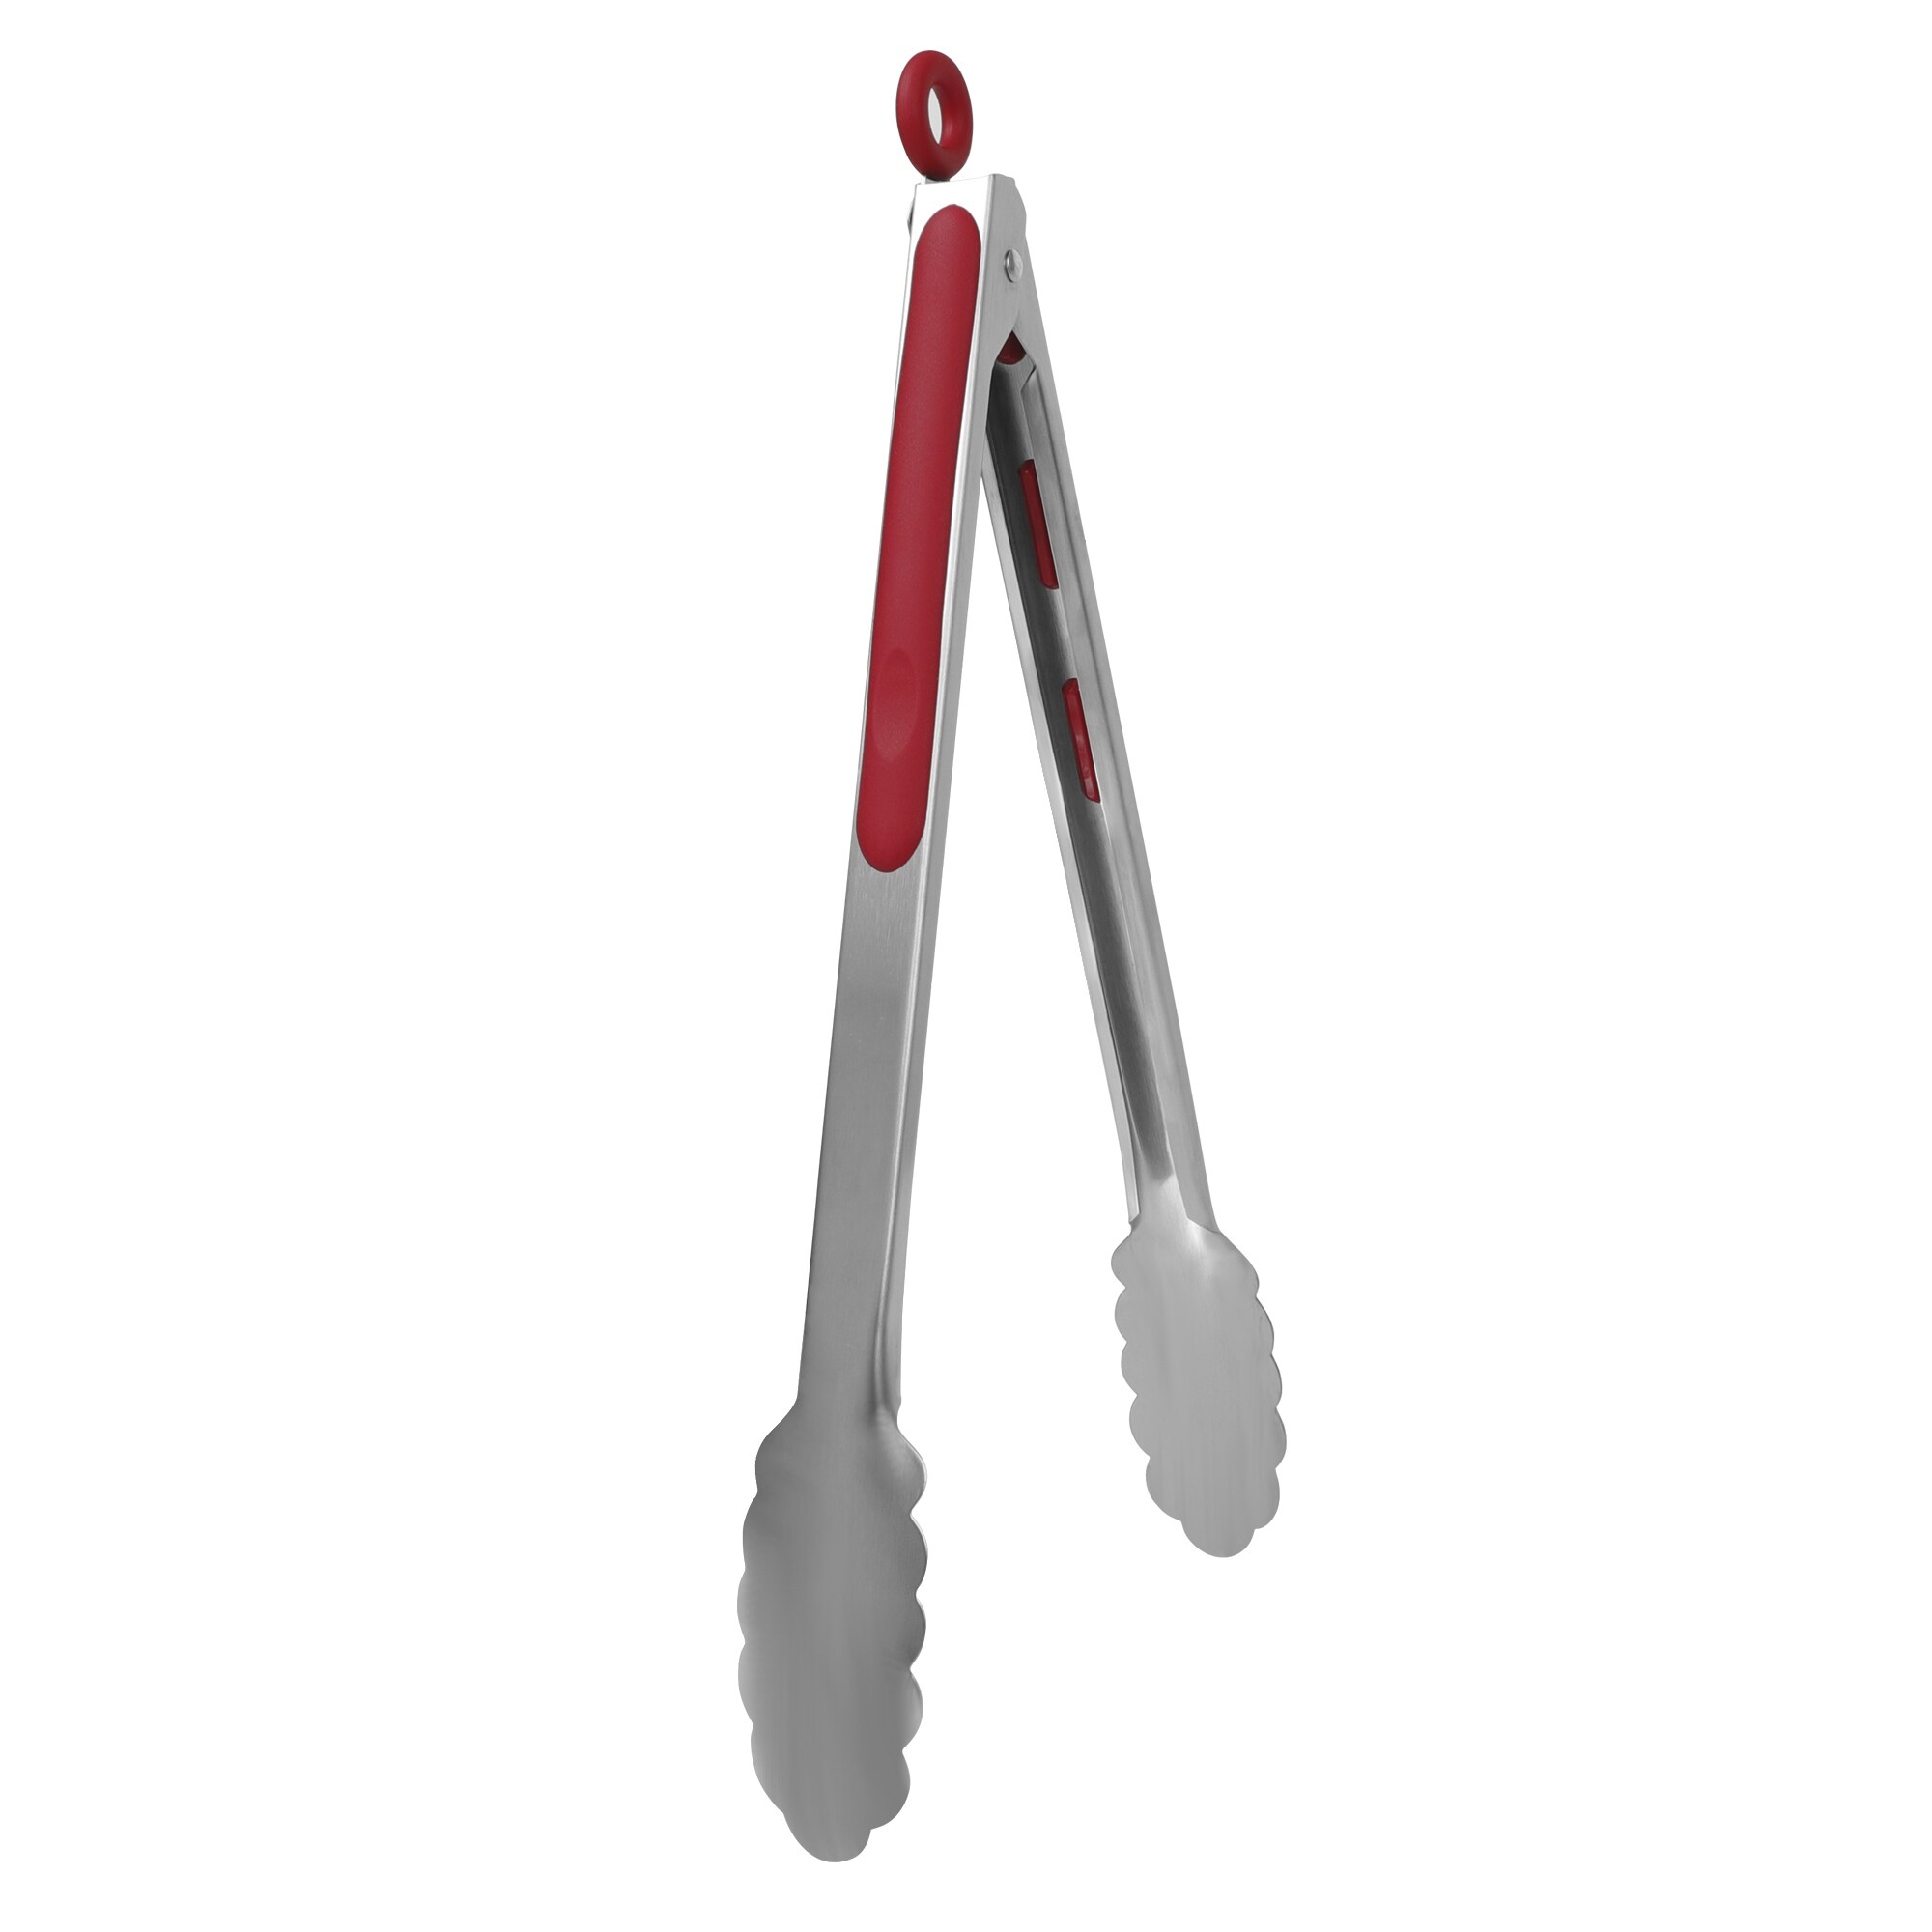 https://ak1.ostkcdn.com/images/products/is/images/direct/95041ffd9d2369497697258772d6f06430afbf6d/Kitchen-Tongs-for-Cooking-Stainless-Steel-Tongs-Silicone-Grip-Grill.jpg